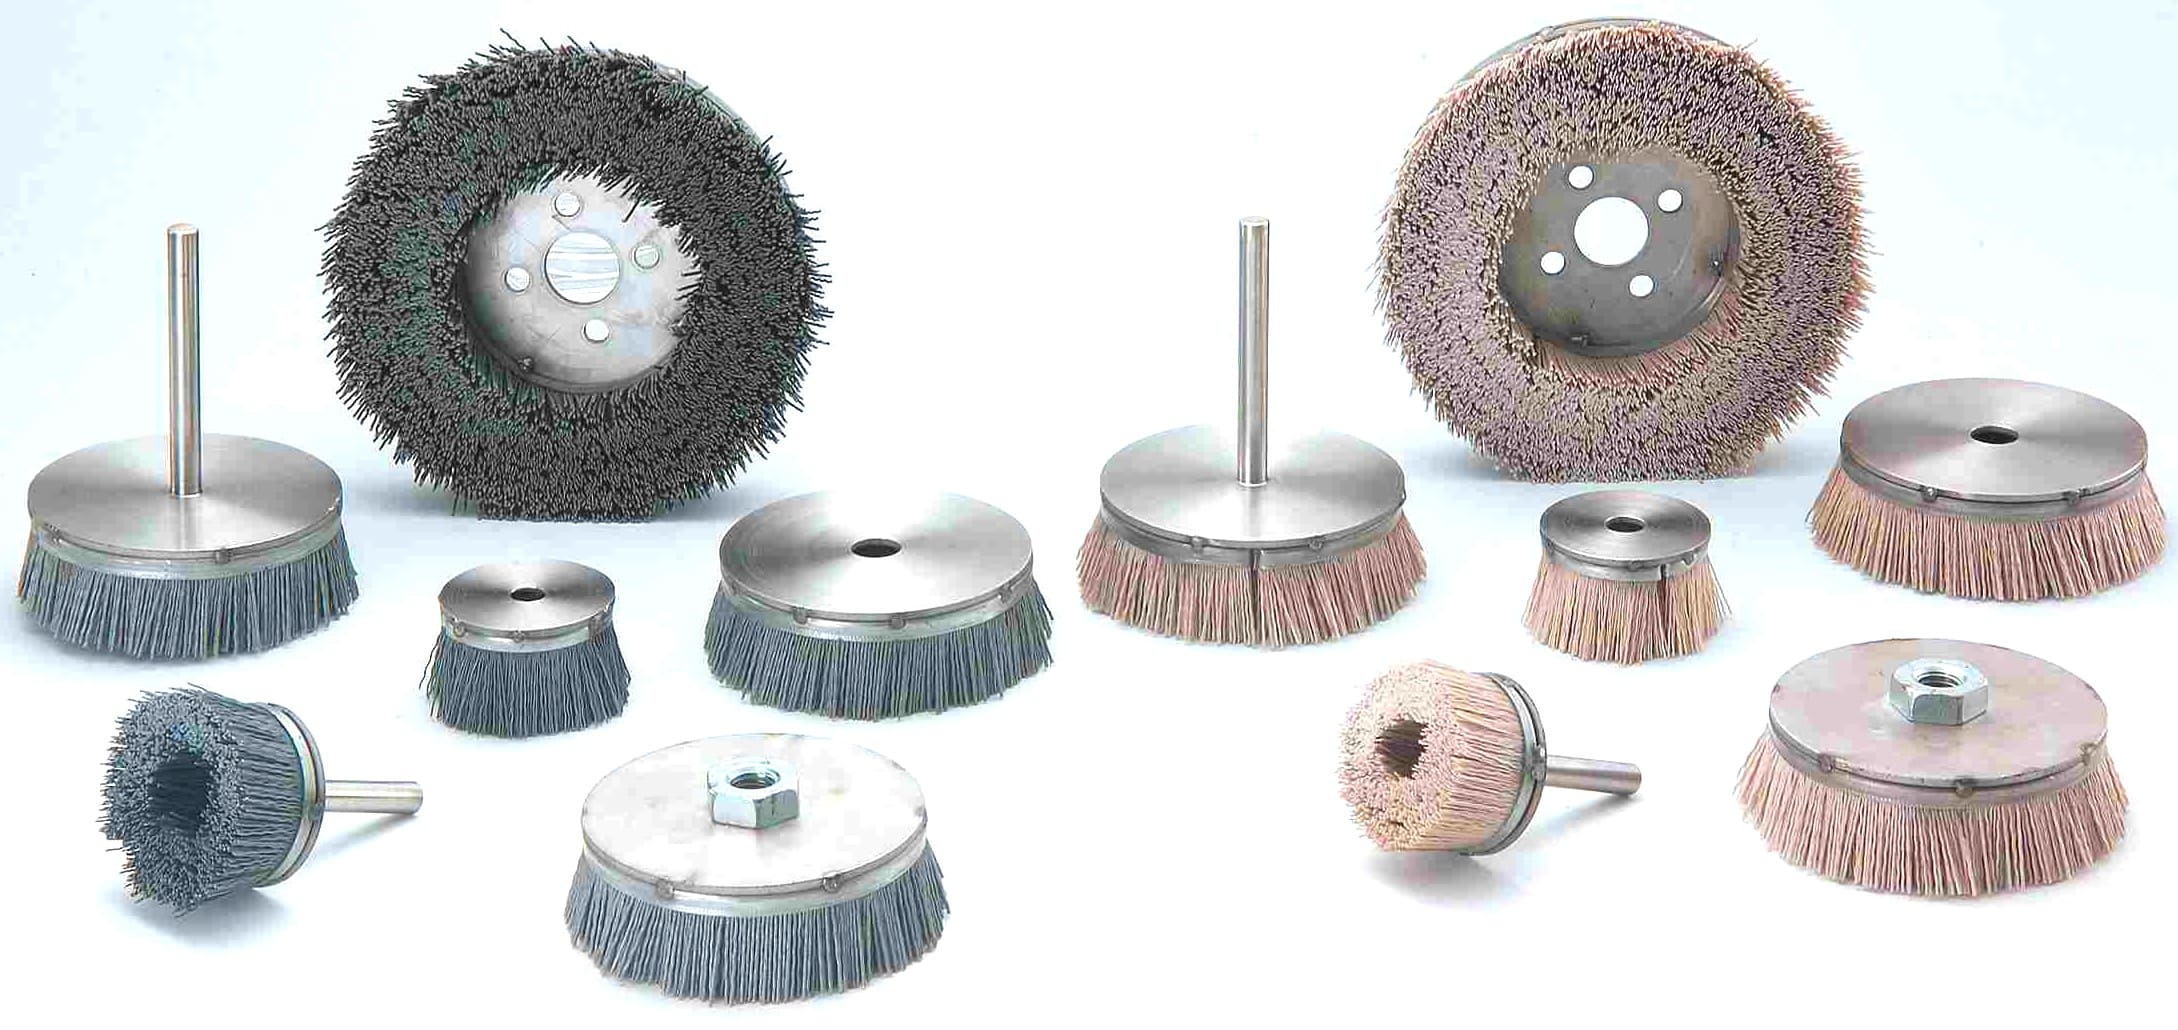 Abrasive Nylon brushesGrit choices are available in Silicon Carbide & Aluminum Oxide -研磨砂顆粒＃46 -- #1500 番數皆齊全